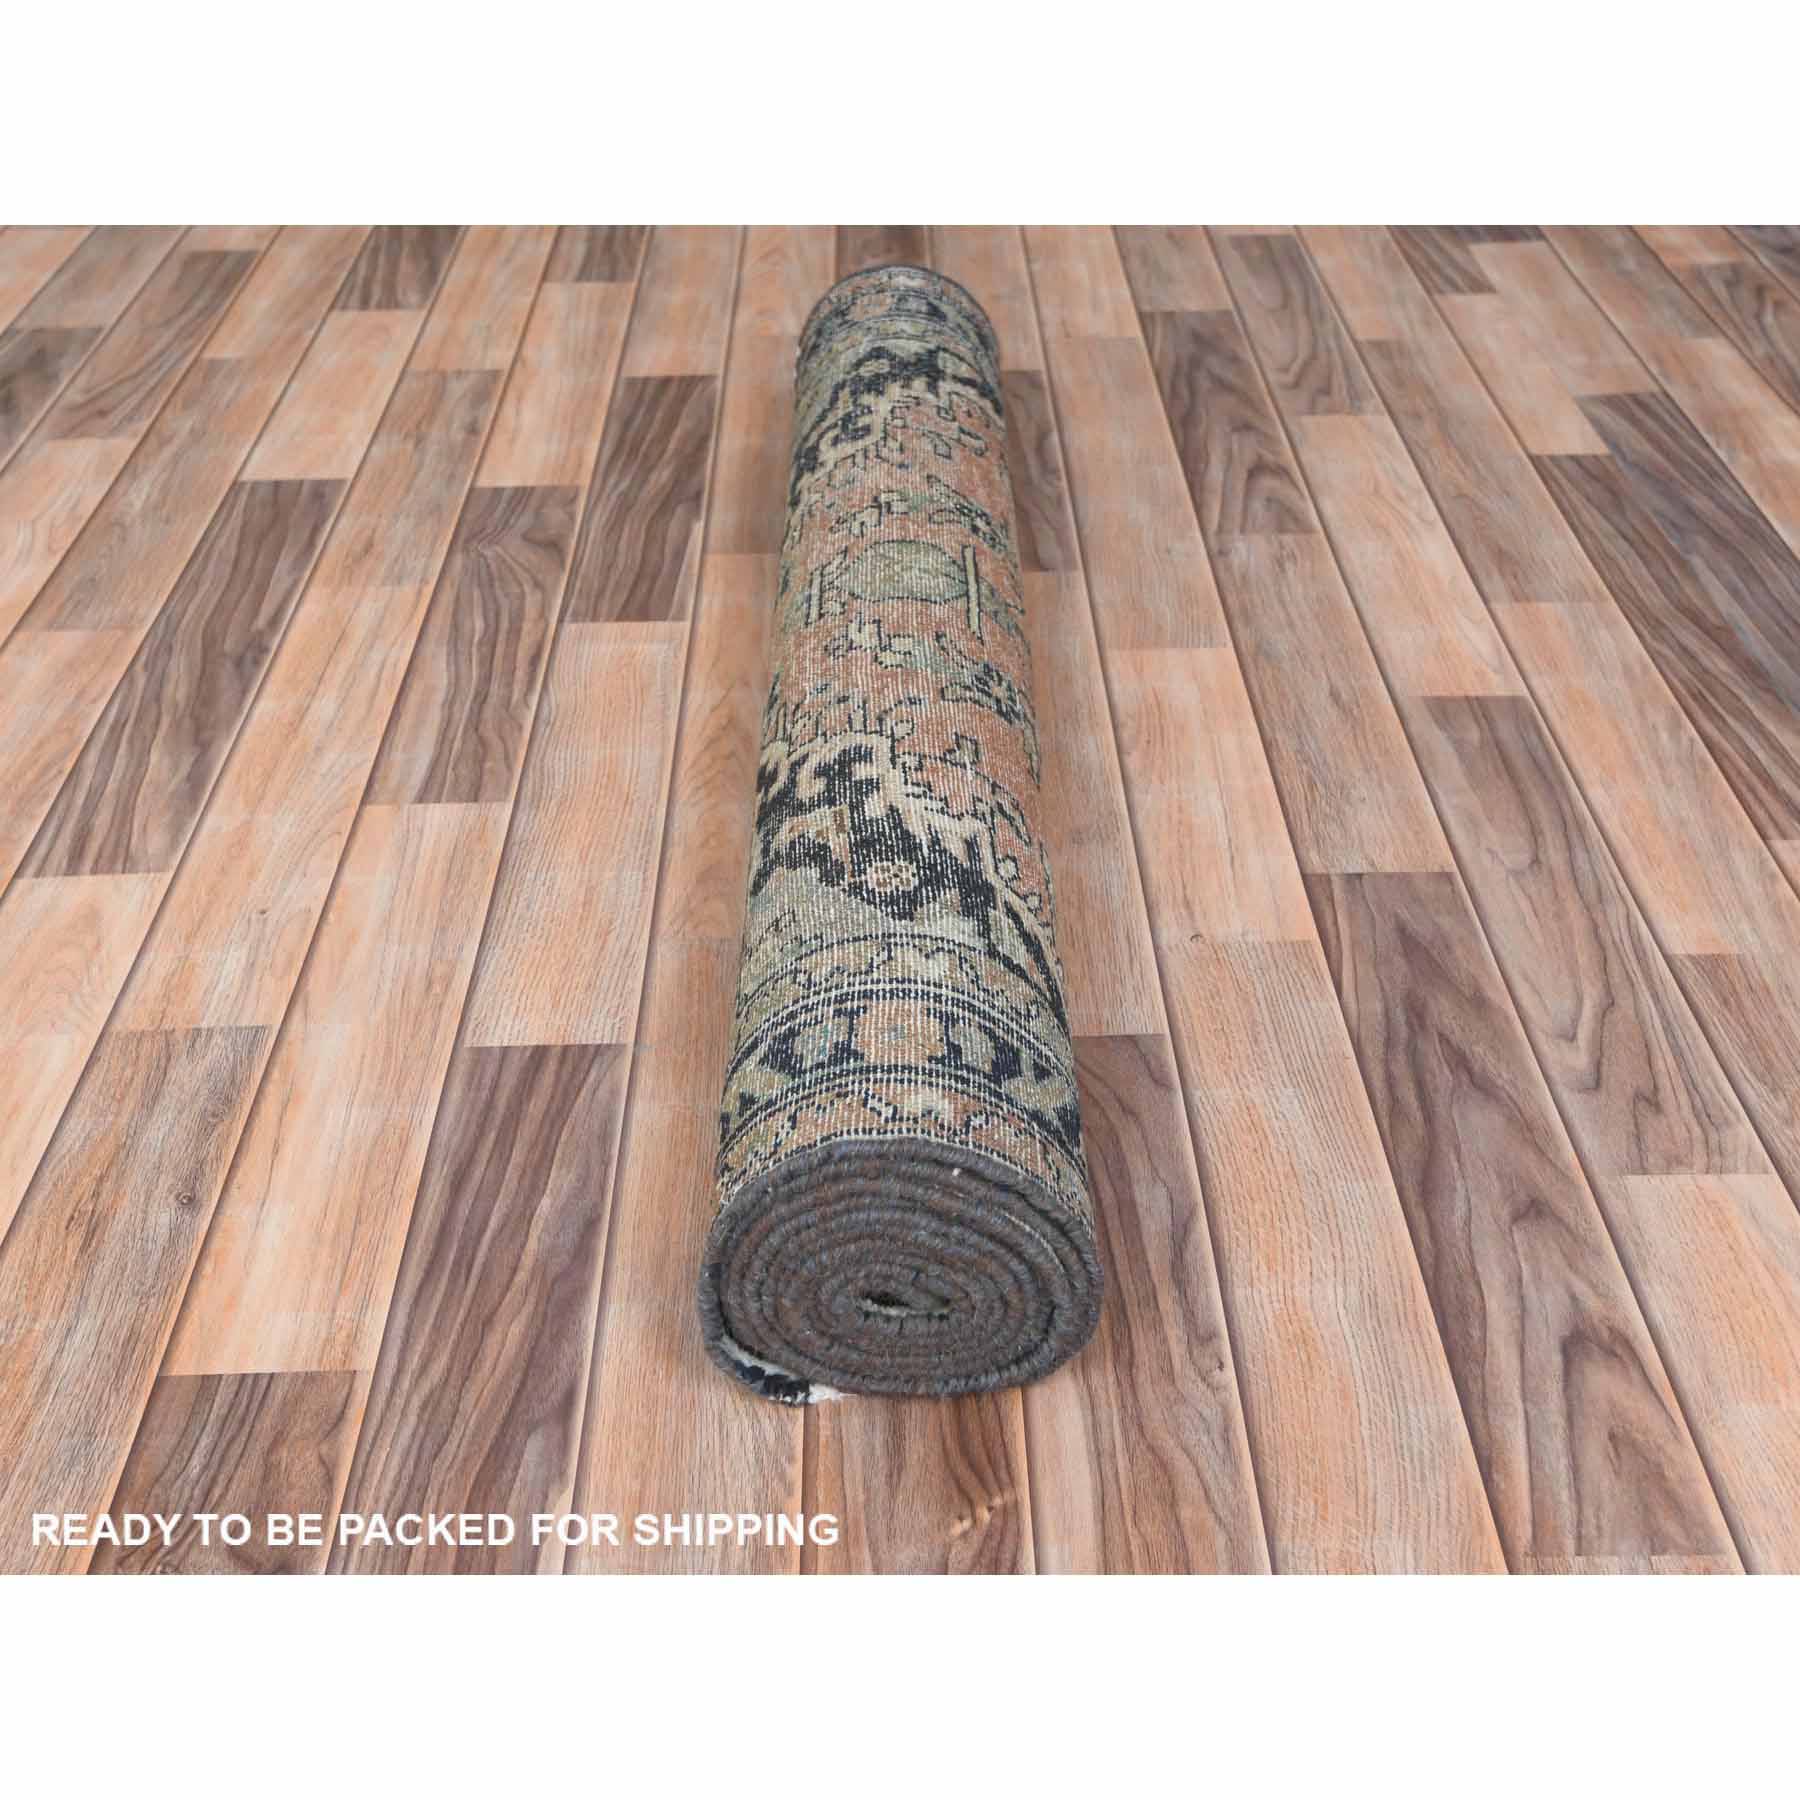 Overdyed-Vintage-Hand-Knotted-Rug-309720